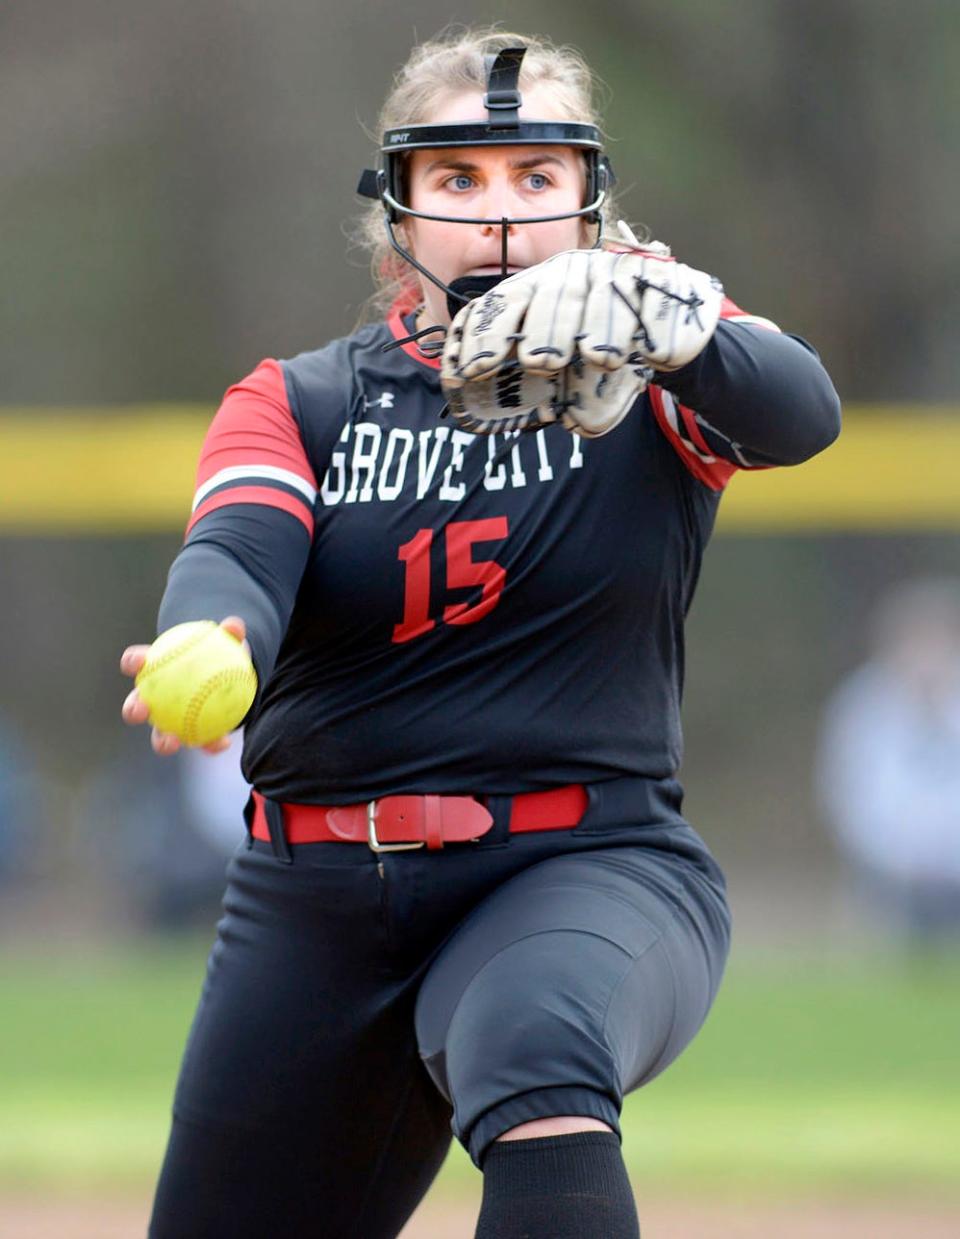 Tri-Valley grad Janessa Dawson throws a pitch for Grove City (Pennsylvania) this past season. She led the team in wins and ERA as a senior, while ranking among the best in program history in multiple categories.